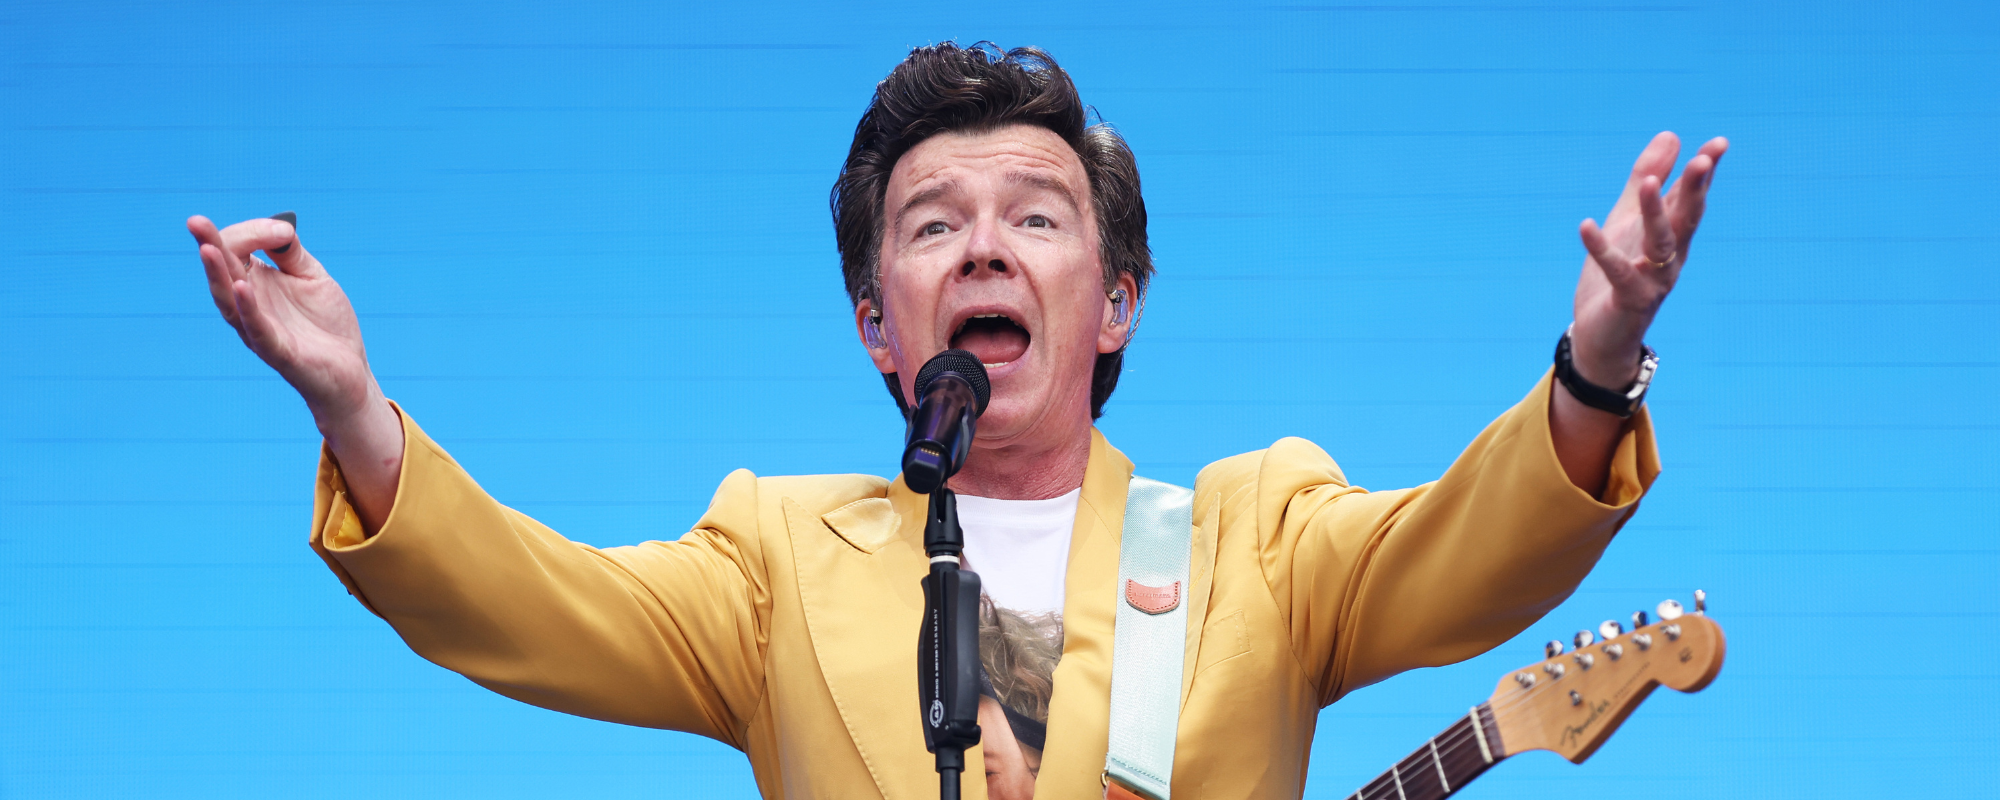 Watch Rick Astley Cover Foo Fighters’ “Everlong” in England